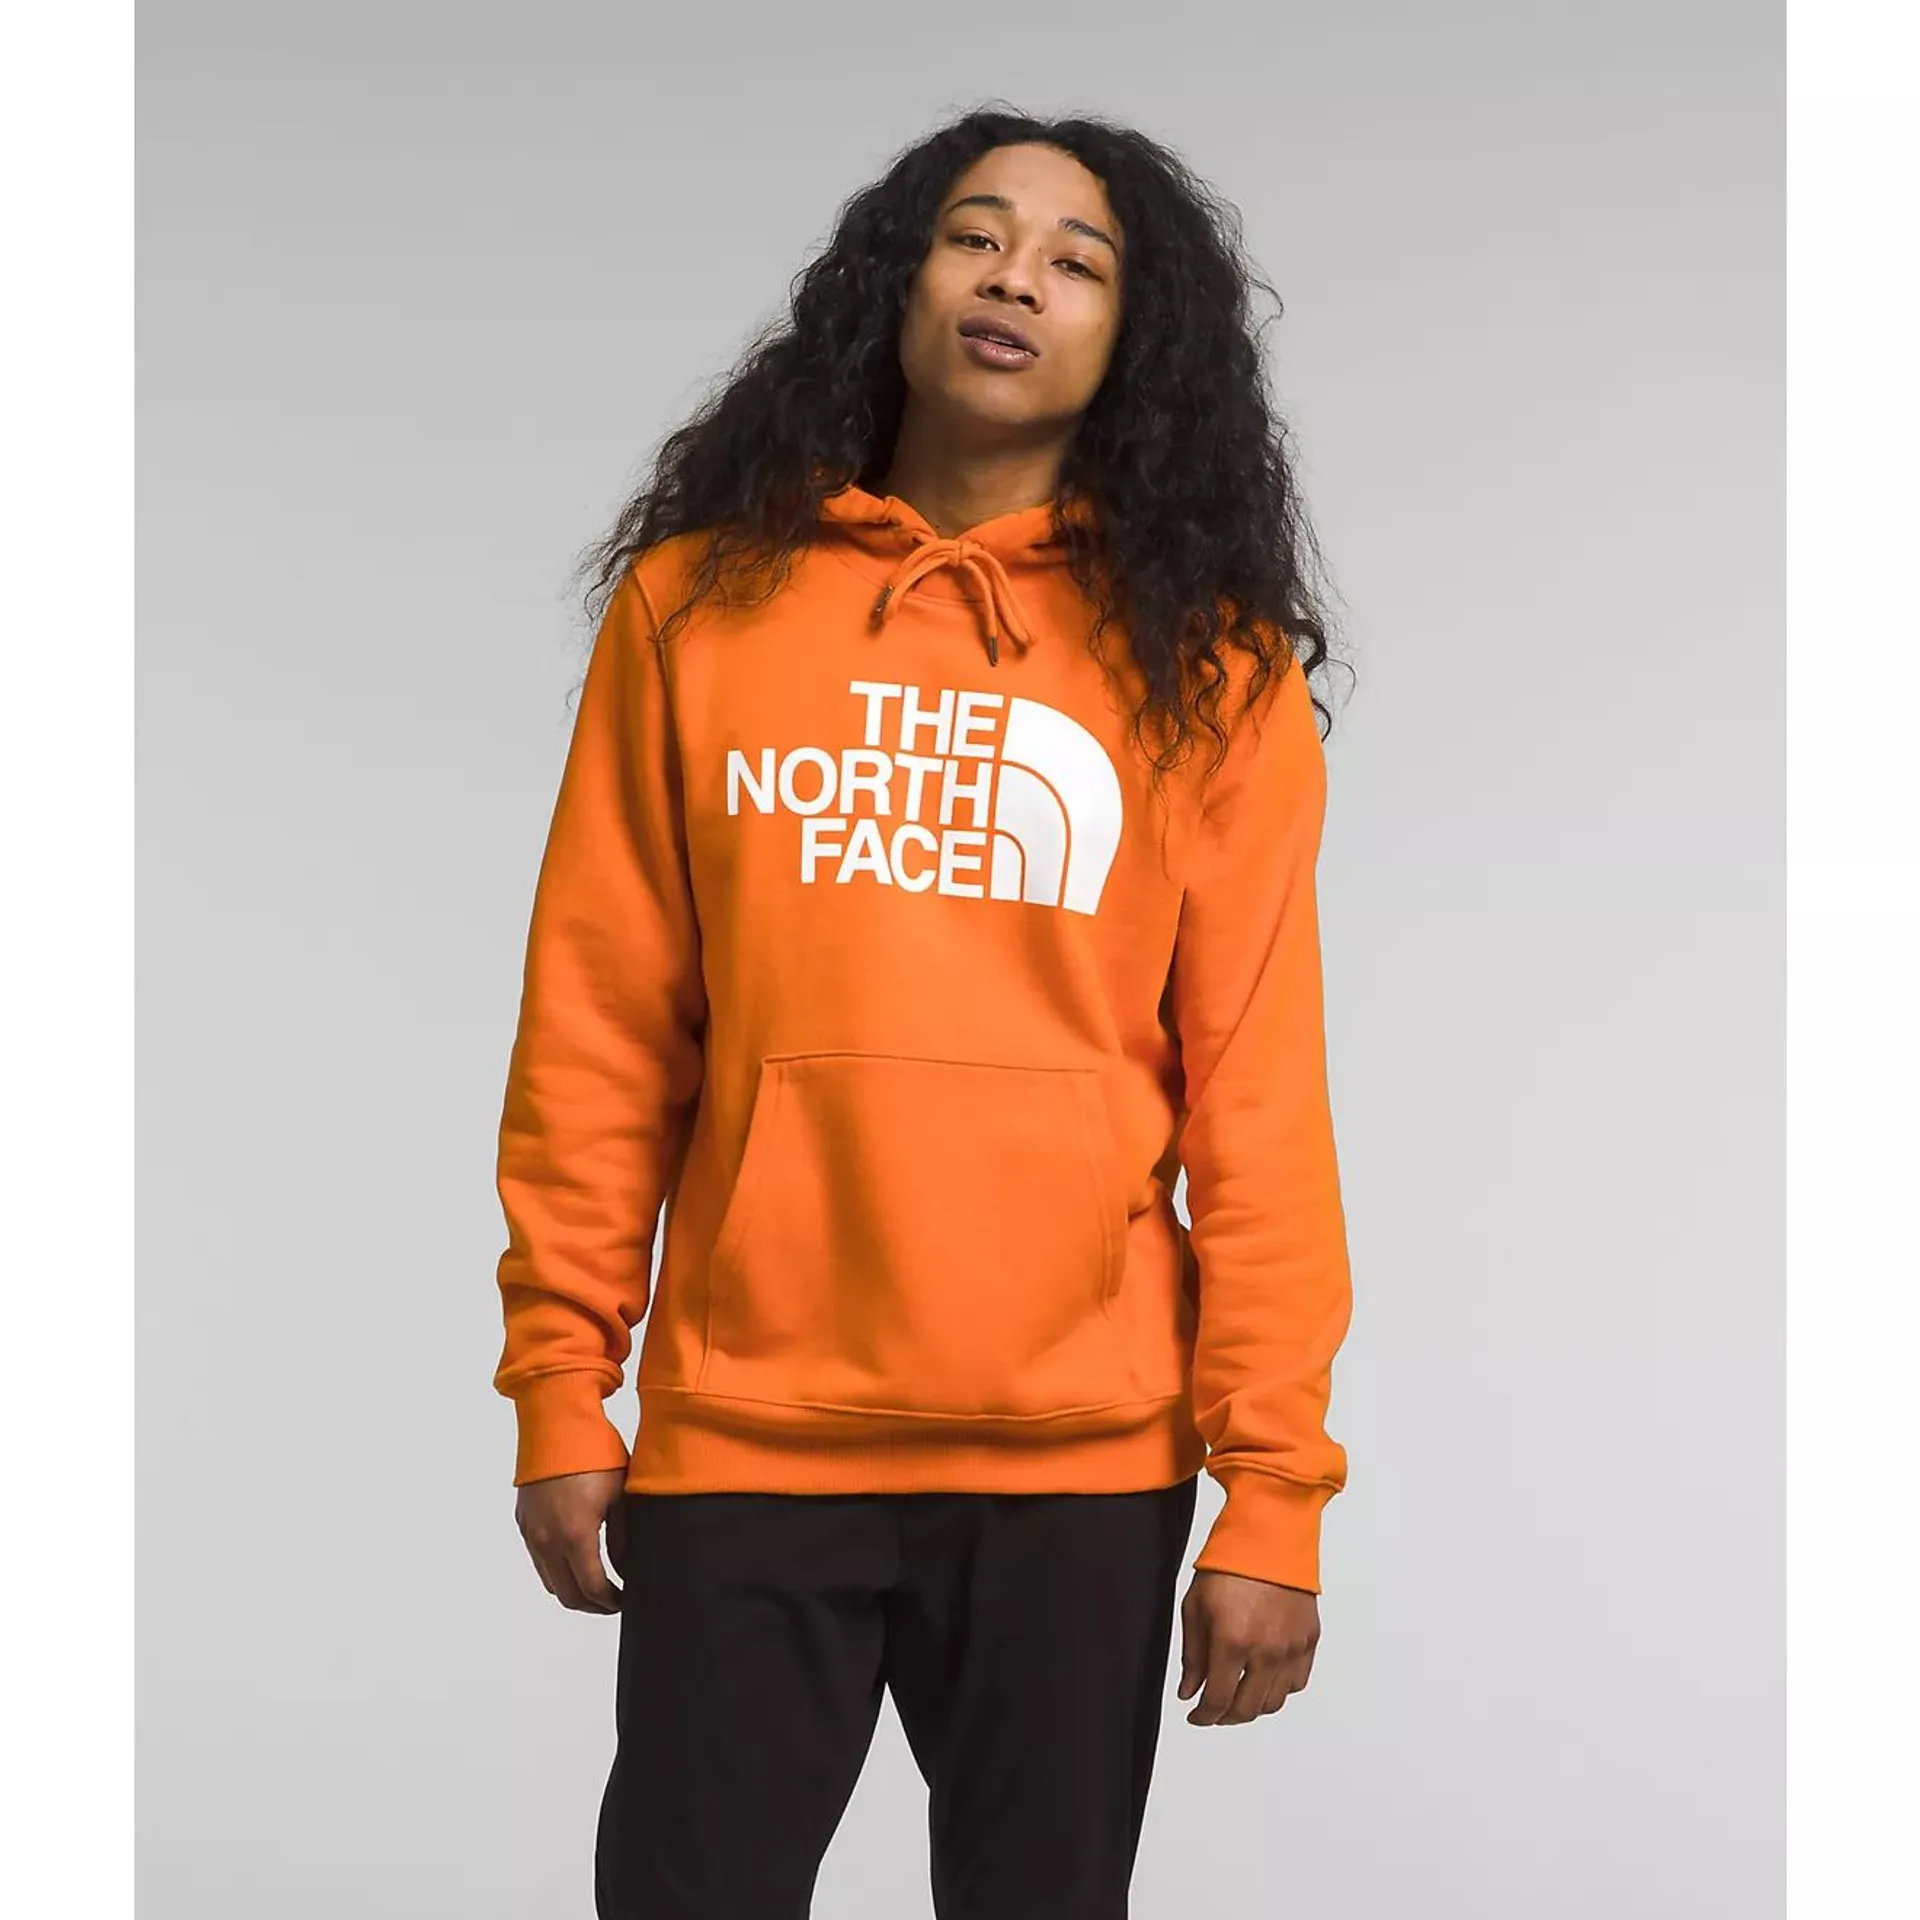 The North Face Men's Half Dome Pullover Hoodie